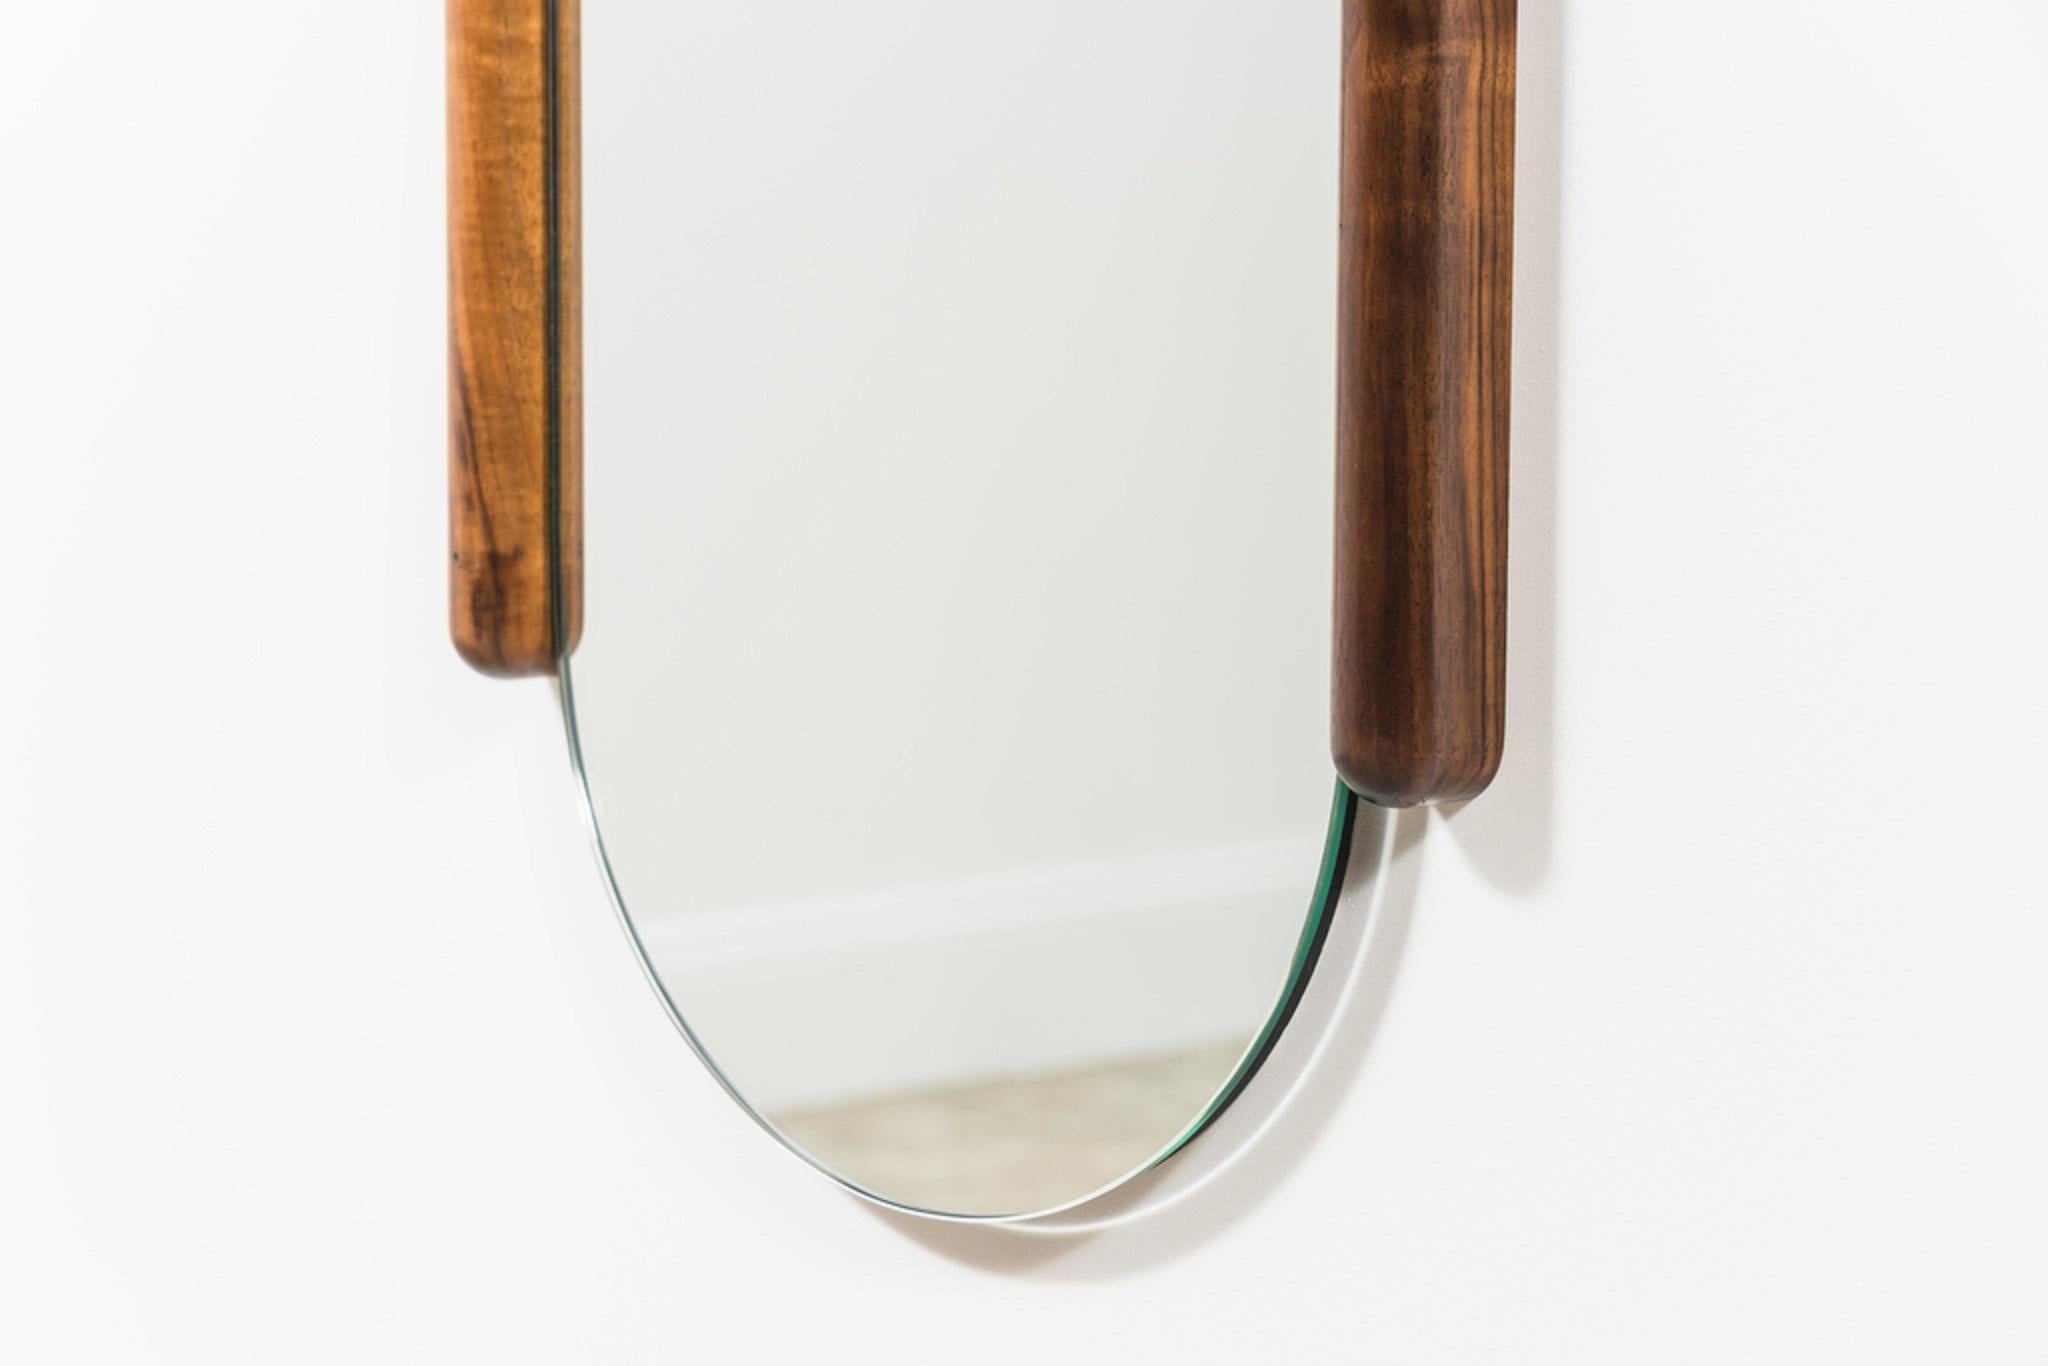 The design of the Tall Halo mirror relishes in the beauty of joinery. Contrasting wood species emphasize the connections between frame members and the downward arcing profile of the mirror seems to mark out the pull of gravity, resisted only by a